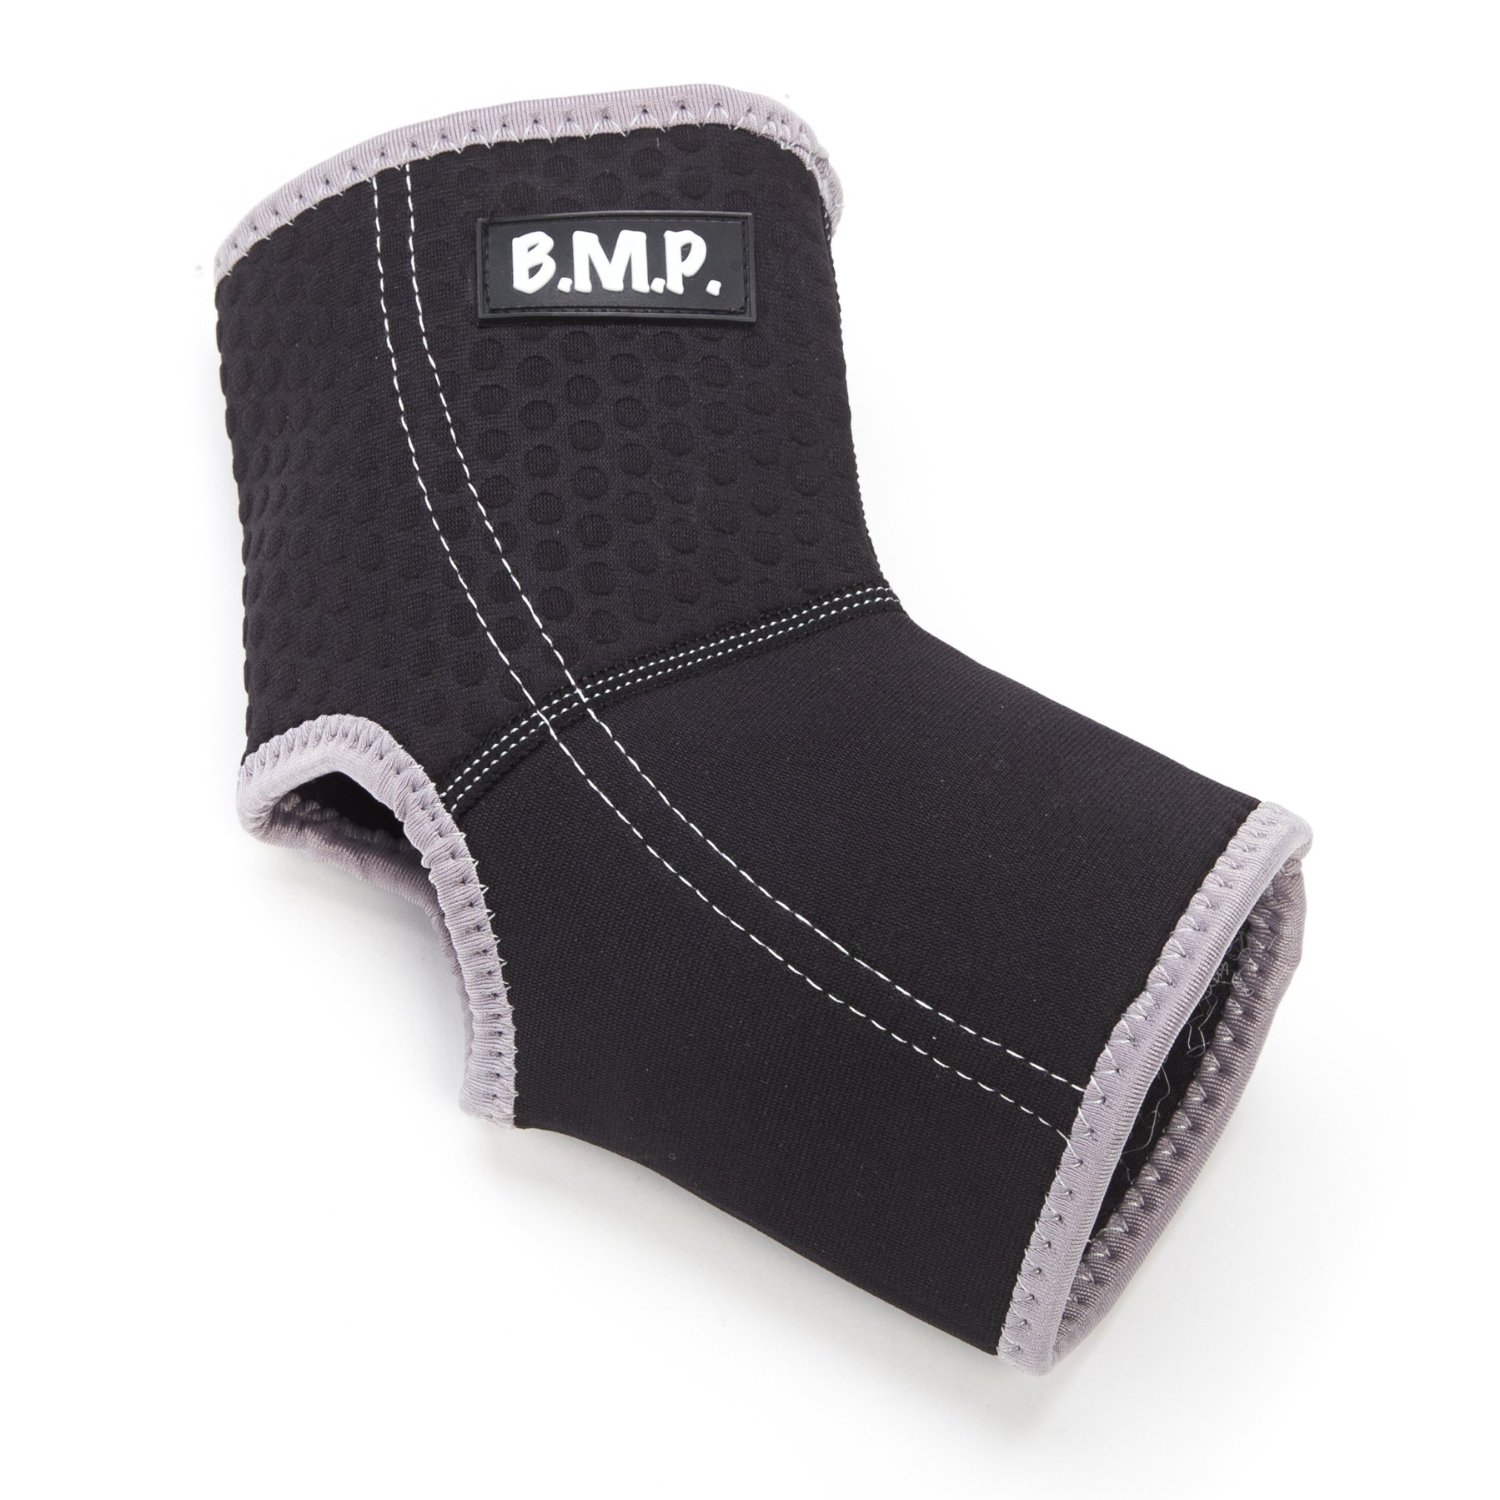 Extra Thick Therapeutic Warming Knee Brace